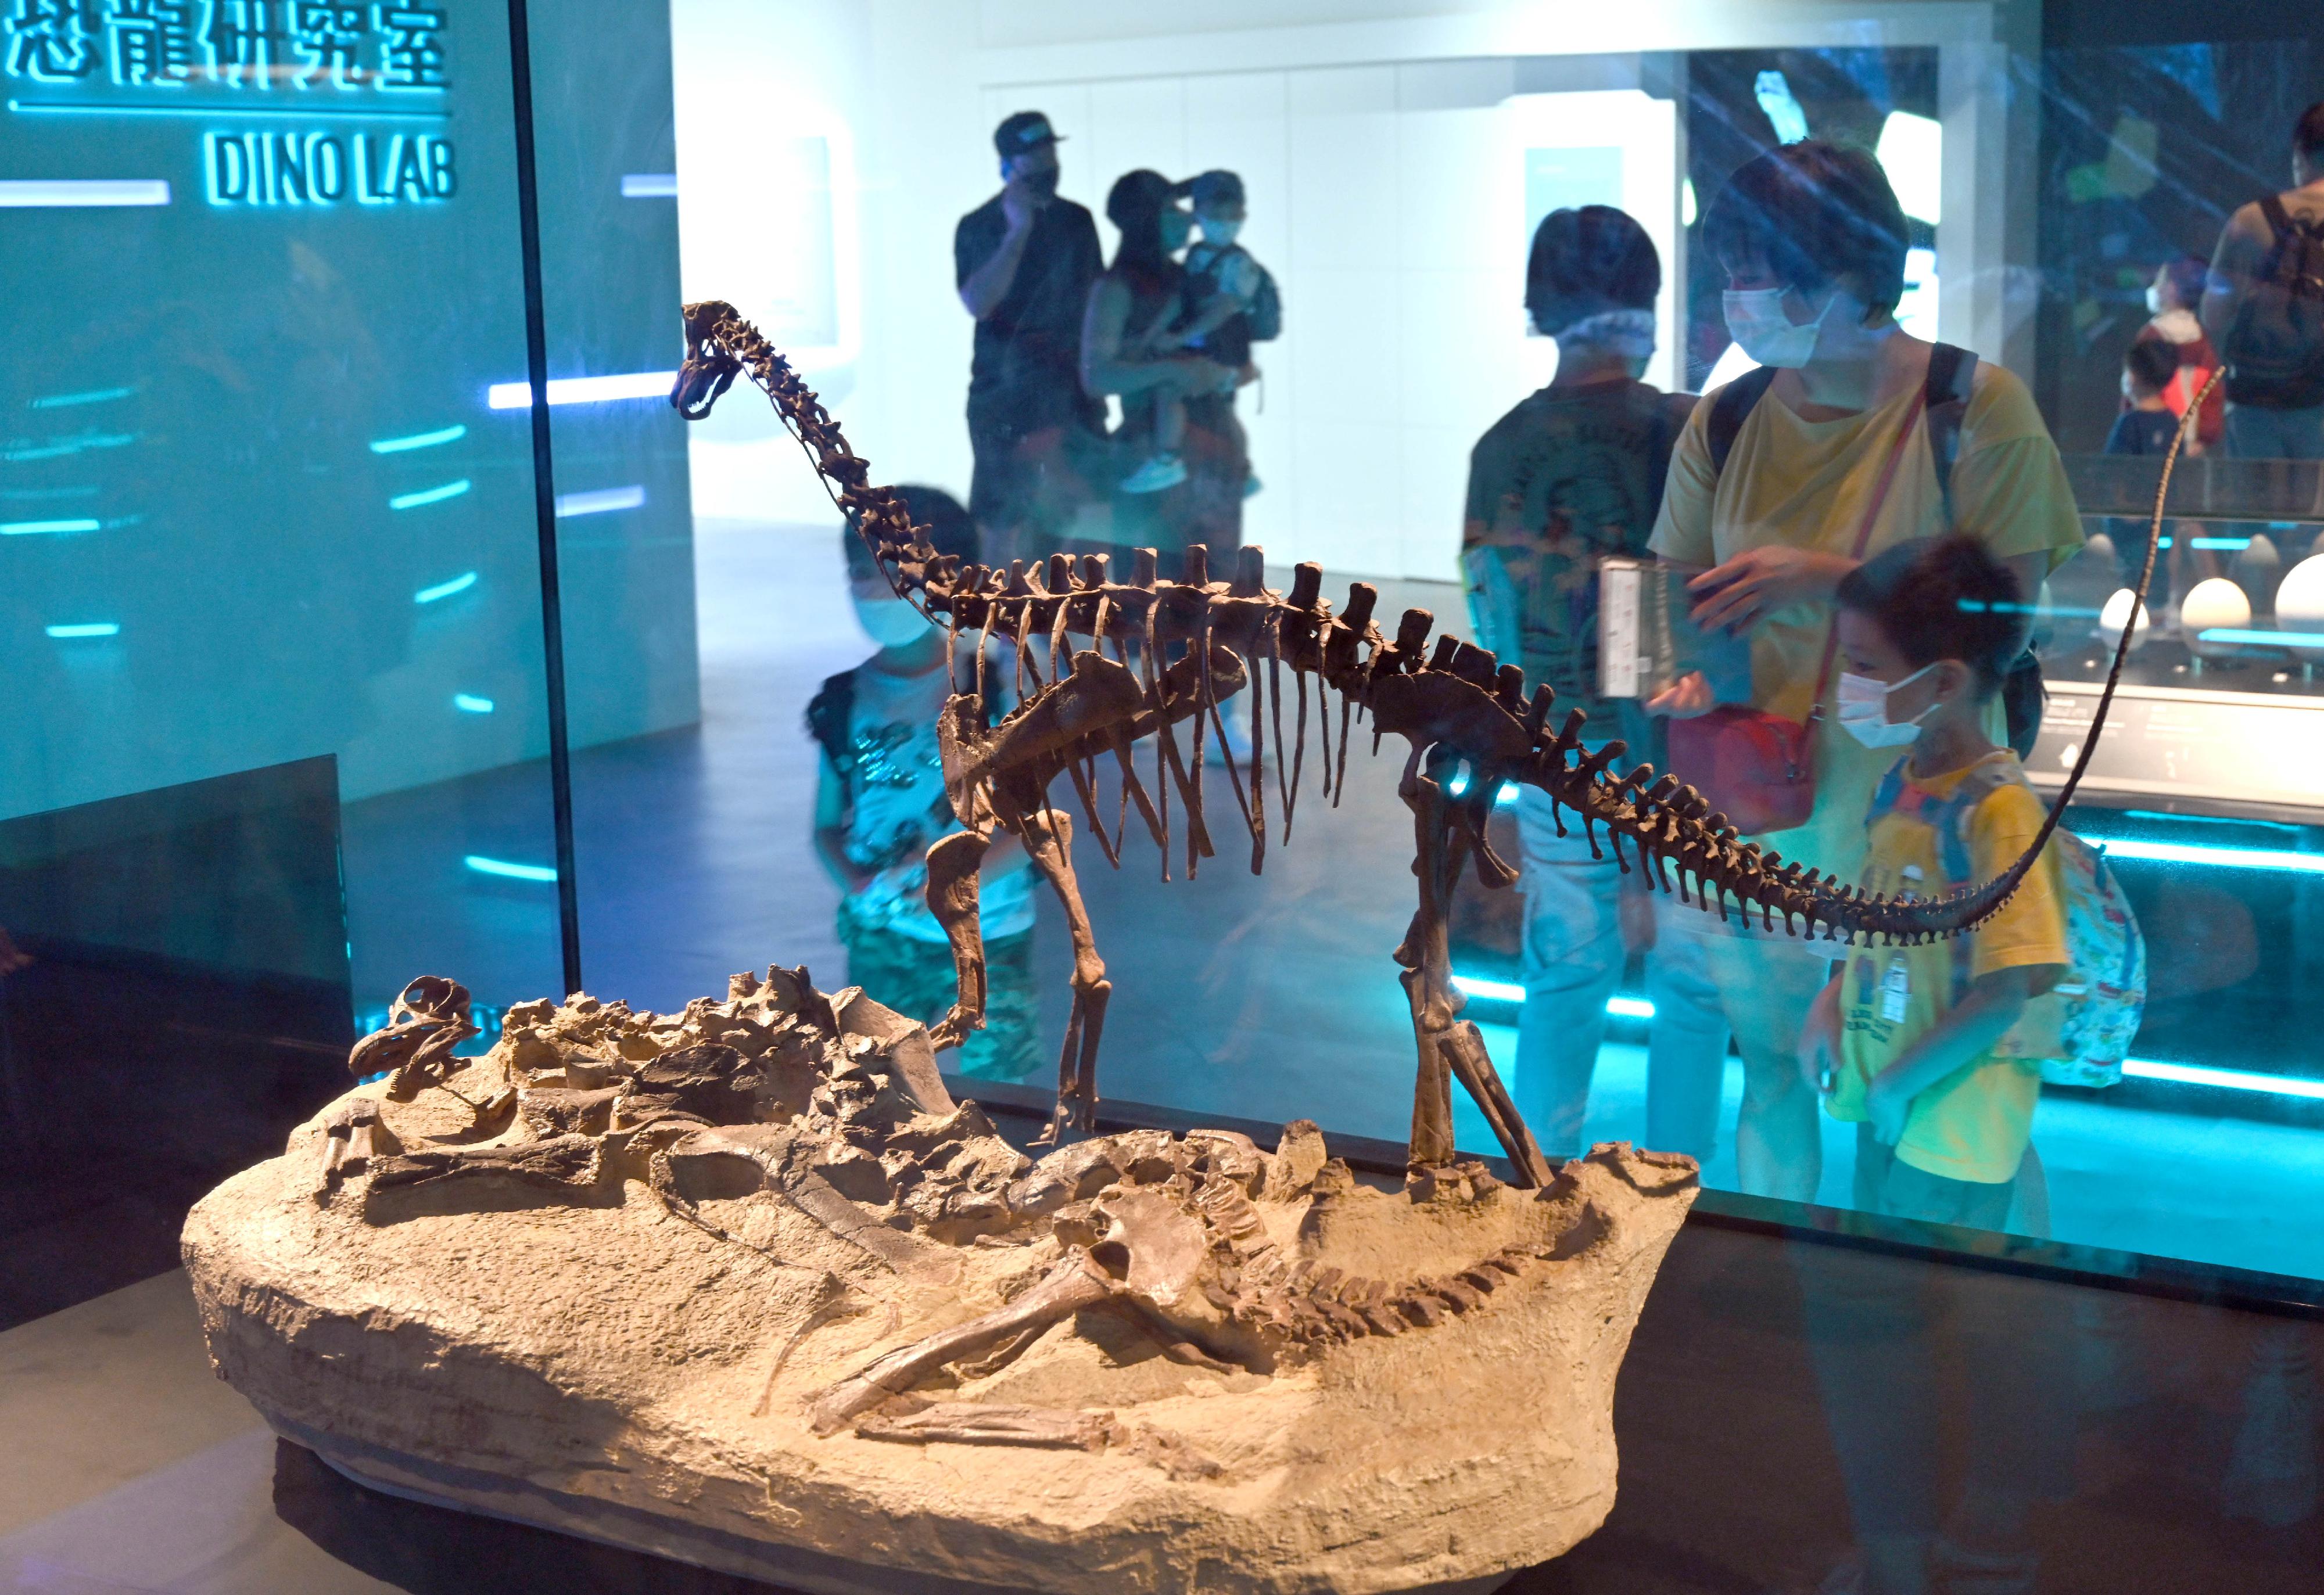 The Hong Kong Science Museum's free large-scale dinosaur exhibition, "The Hong Kong Jockey Club Series: The Big Eight - Dinosaur Revelation" has received an overwhelming public response since its opening in July. Picture shows visitors viewing the baby Sauropod fossil display in the exhibition gallery. 